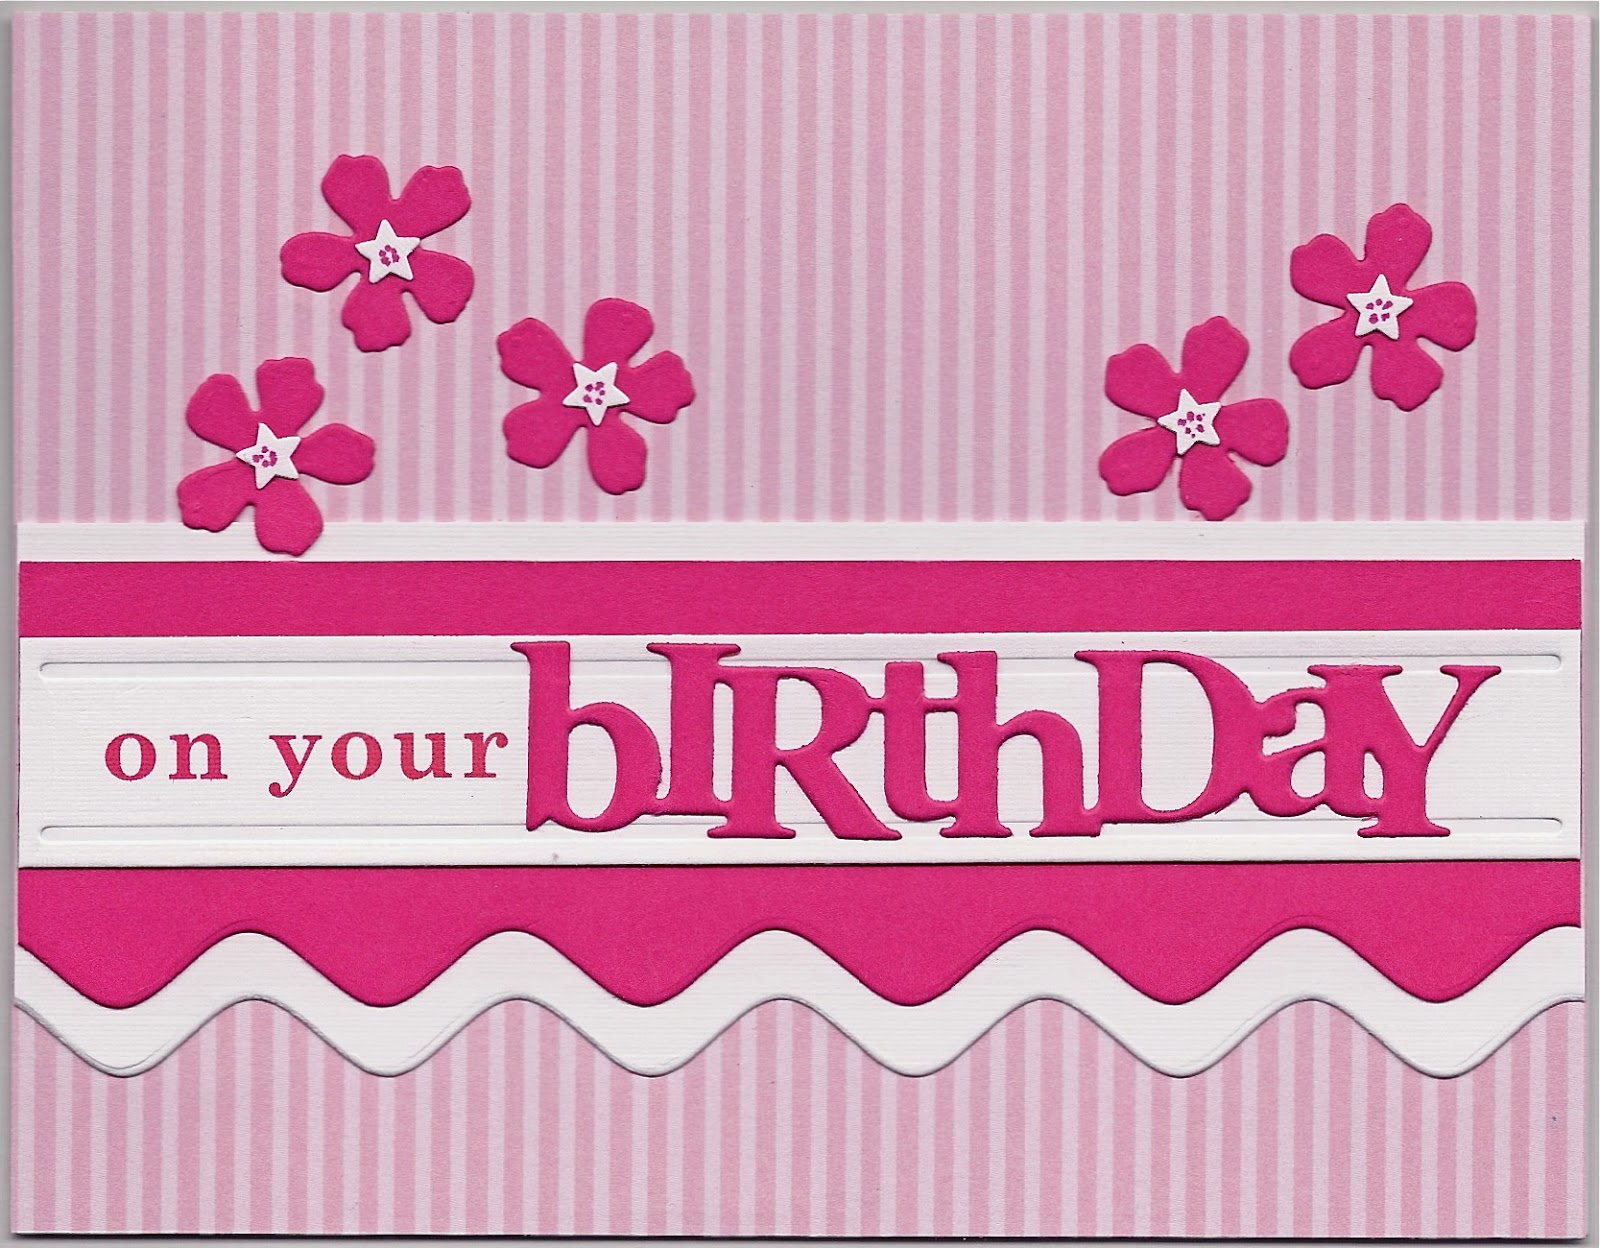 Mostly Markers - Cards: Pink and White Birthday